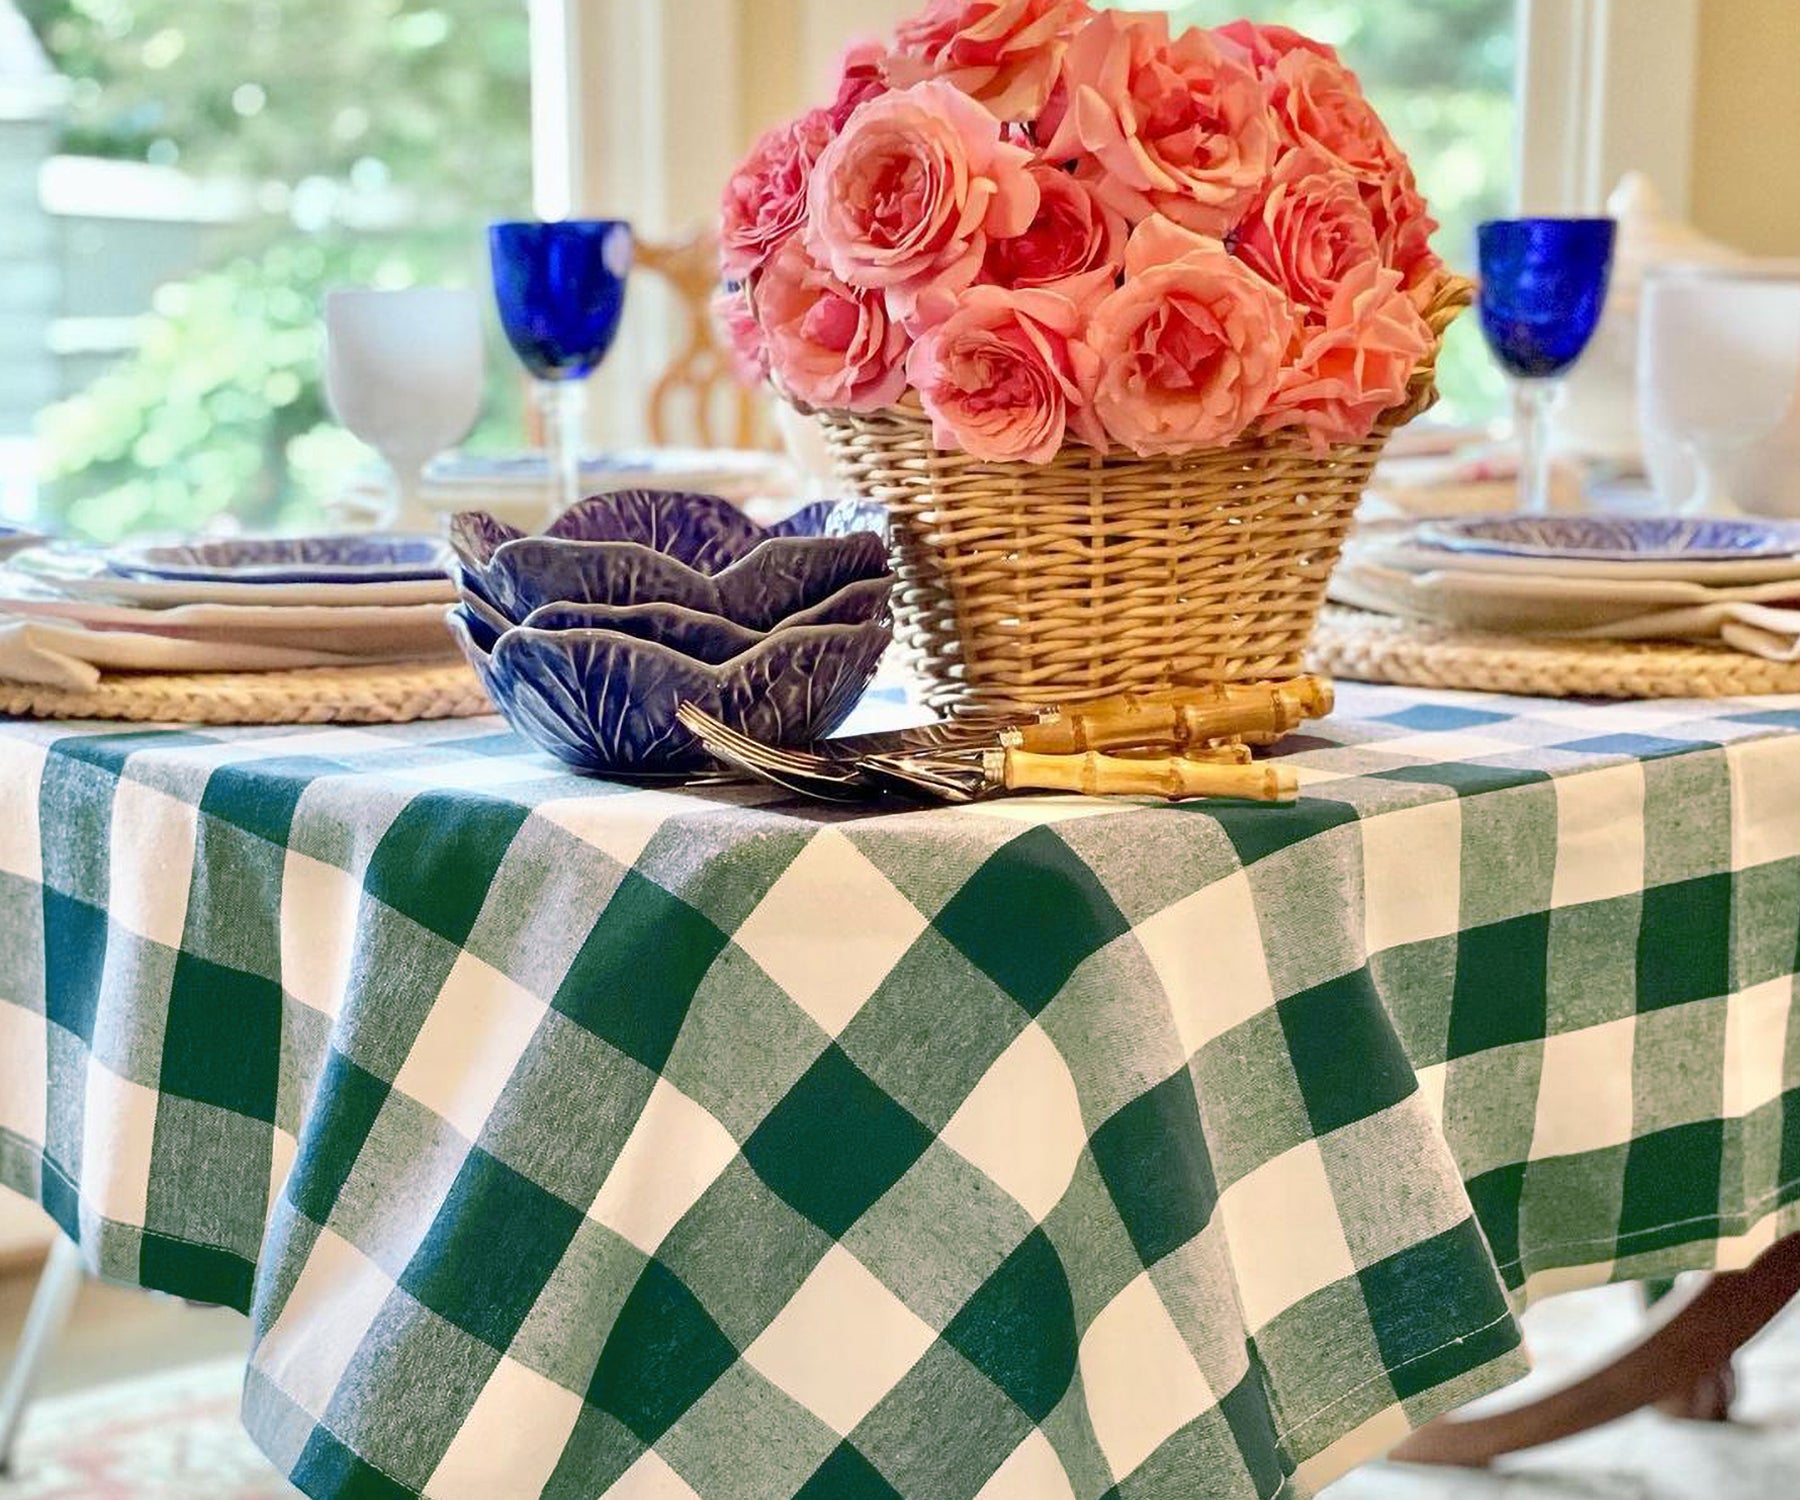 Add elegance to your gatherings with festive round, Thanksgiving-themed, and green tablecloths for a delightful dining experience.